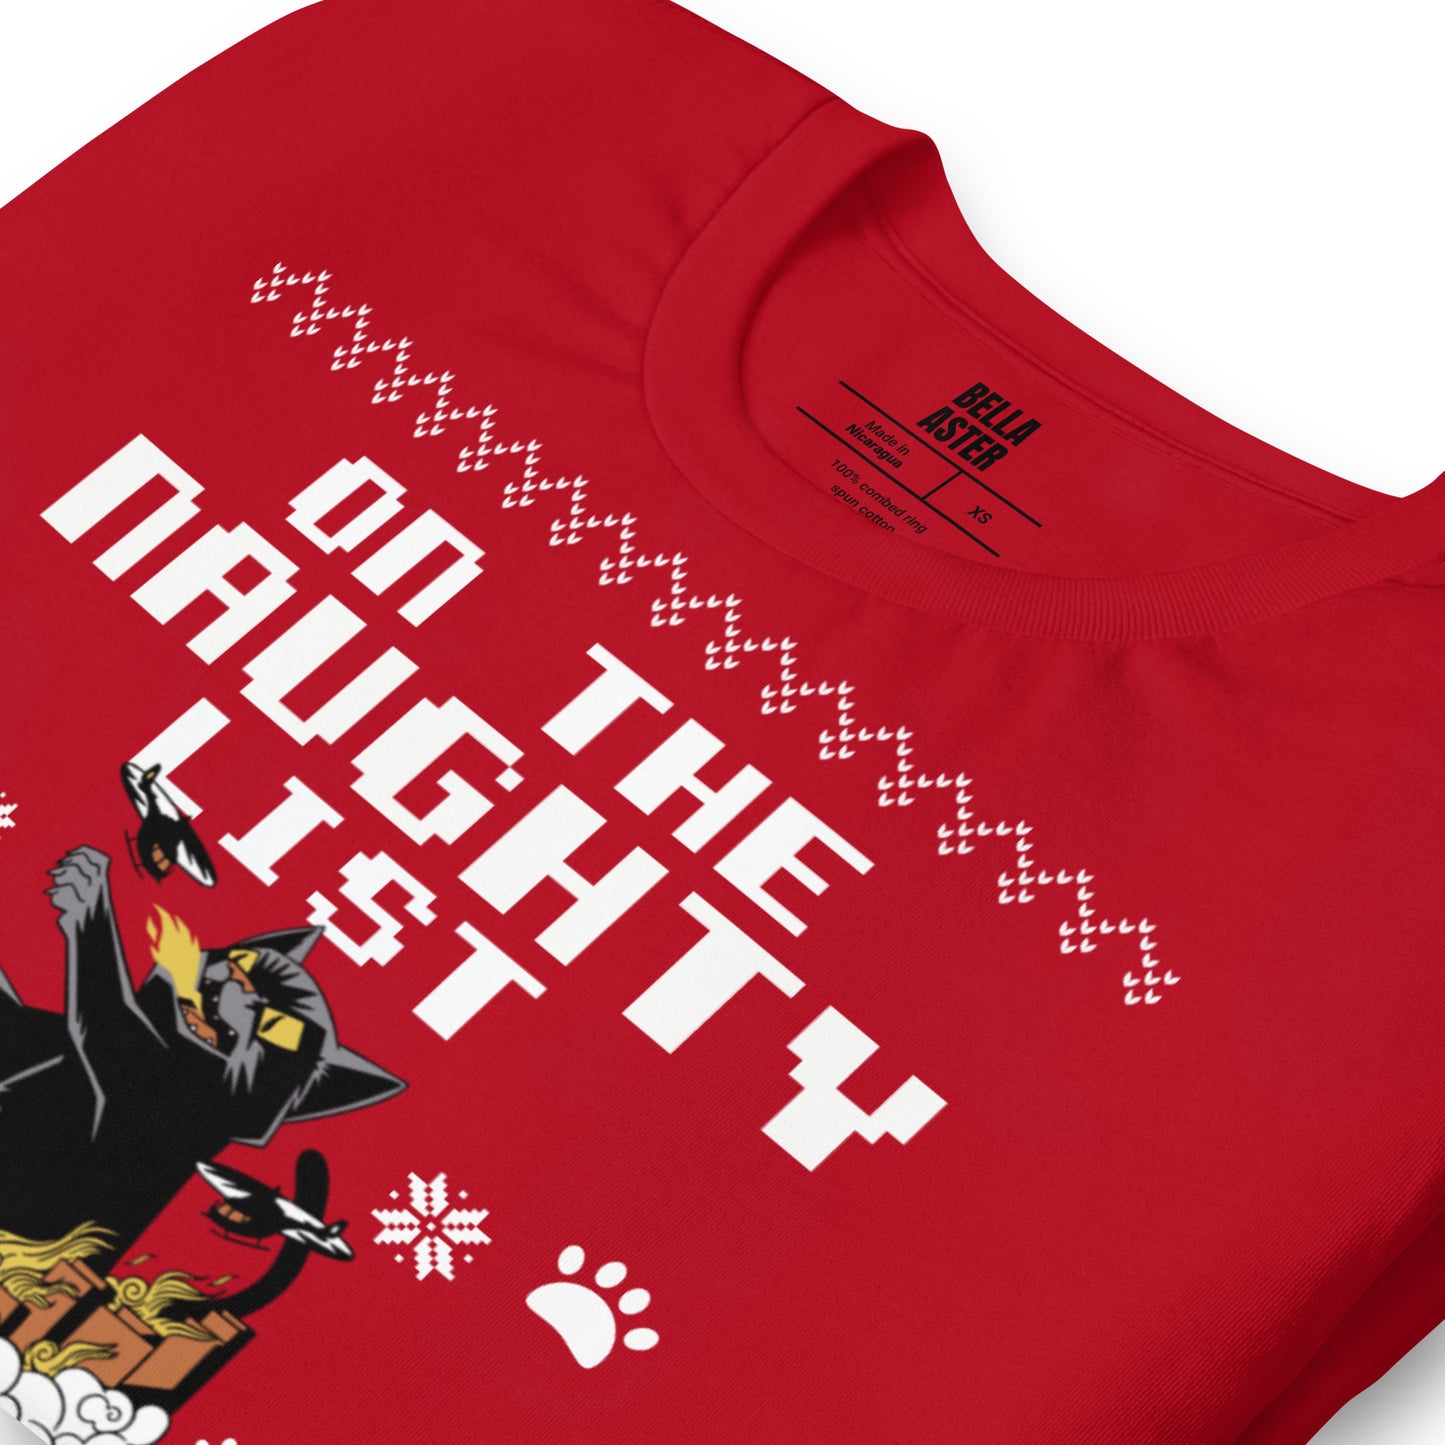 On The Naughty List And I Regret Nothing Unisex T-Shirt